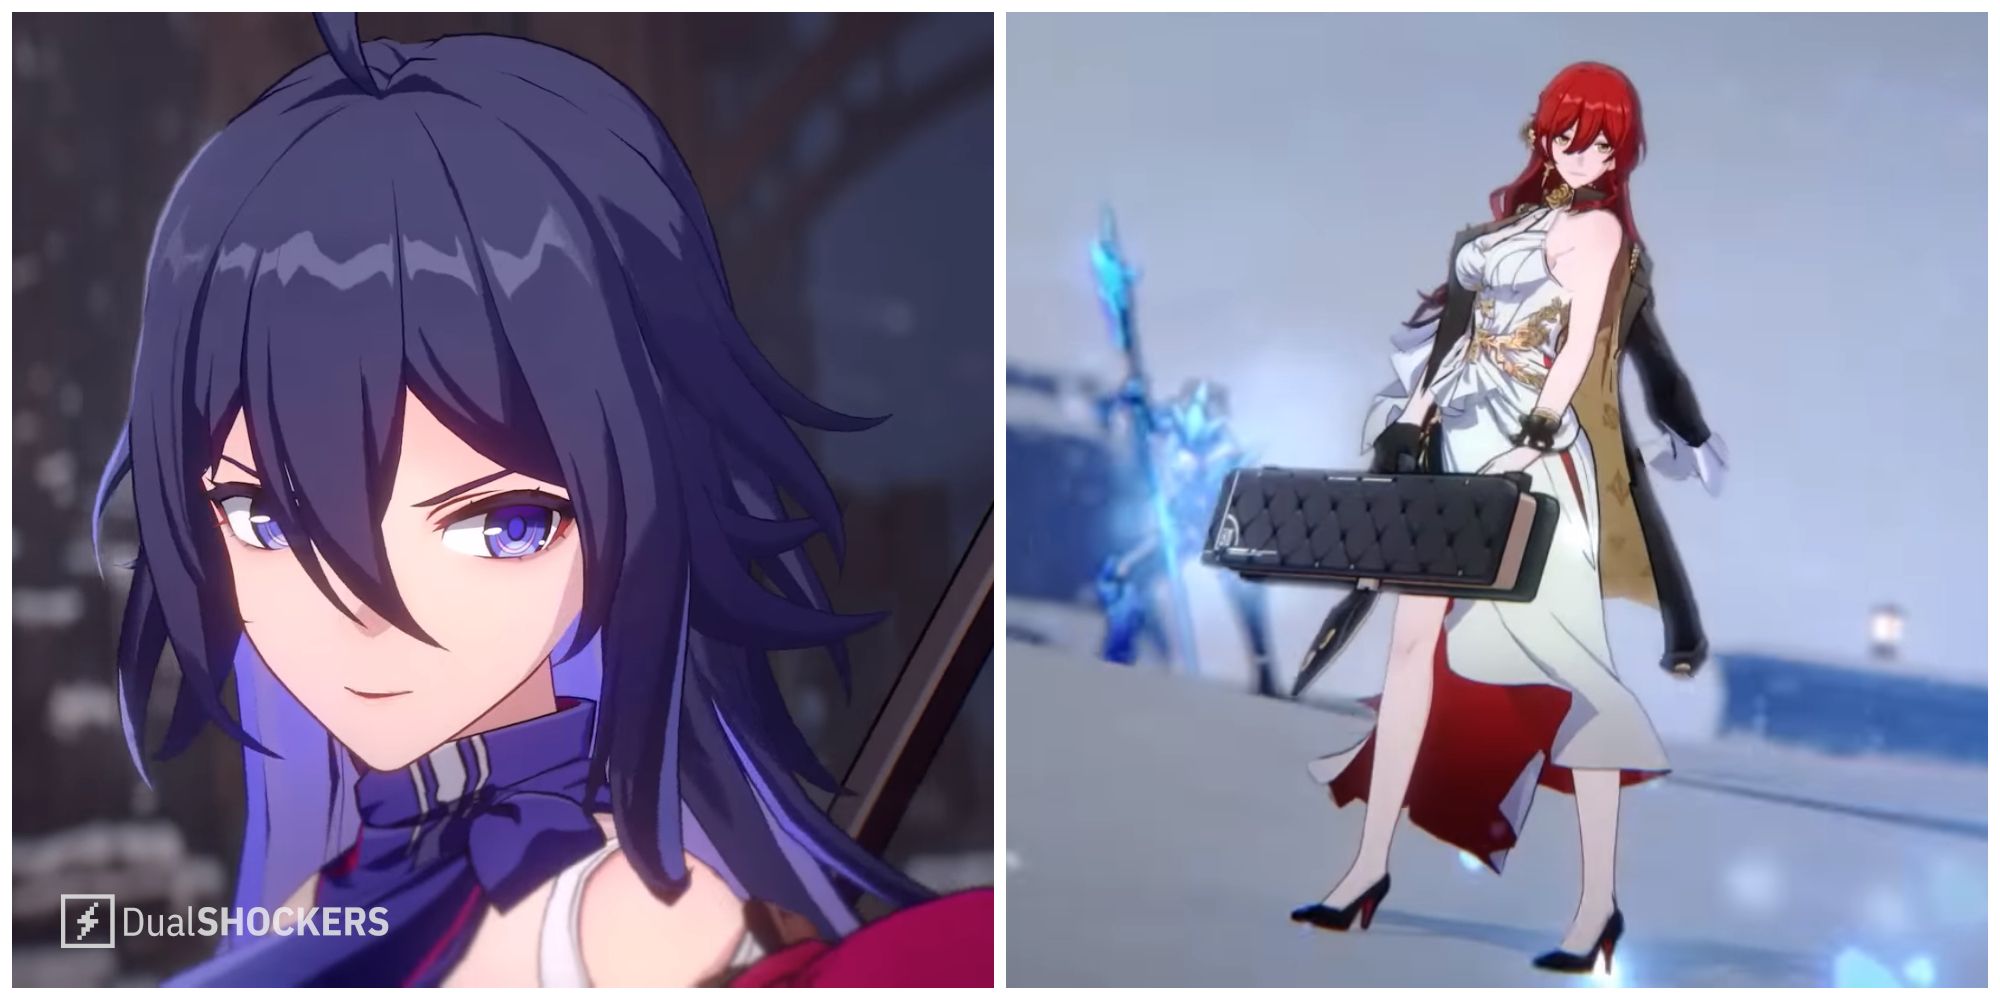 Split image of the characters Seele and Himeko in character trailers for Honkai Star Rail.